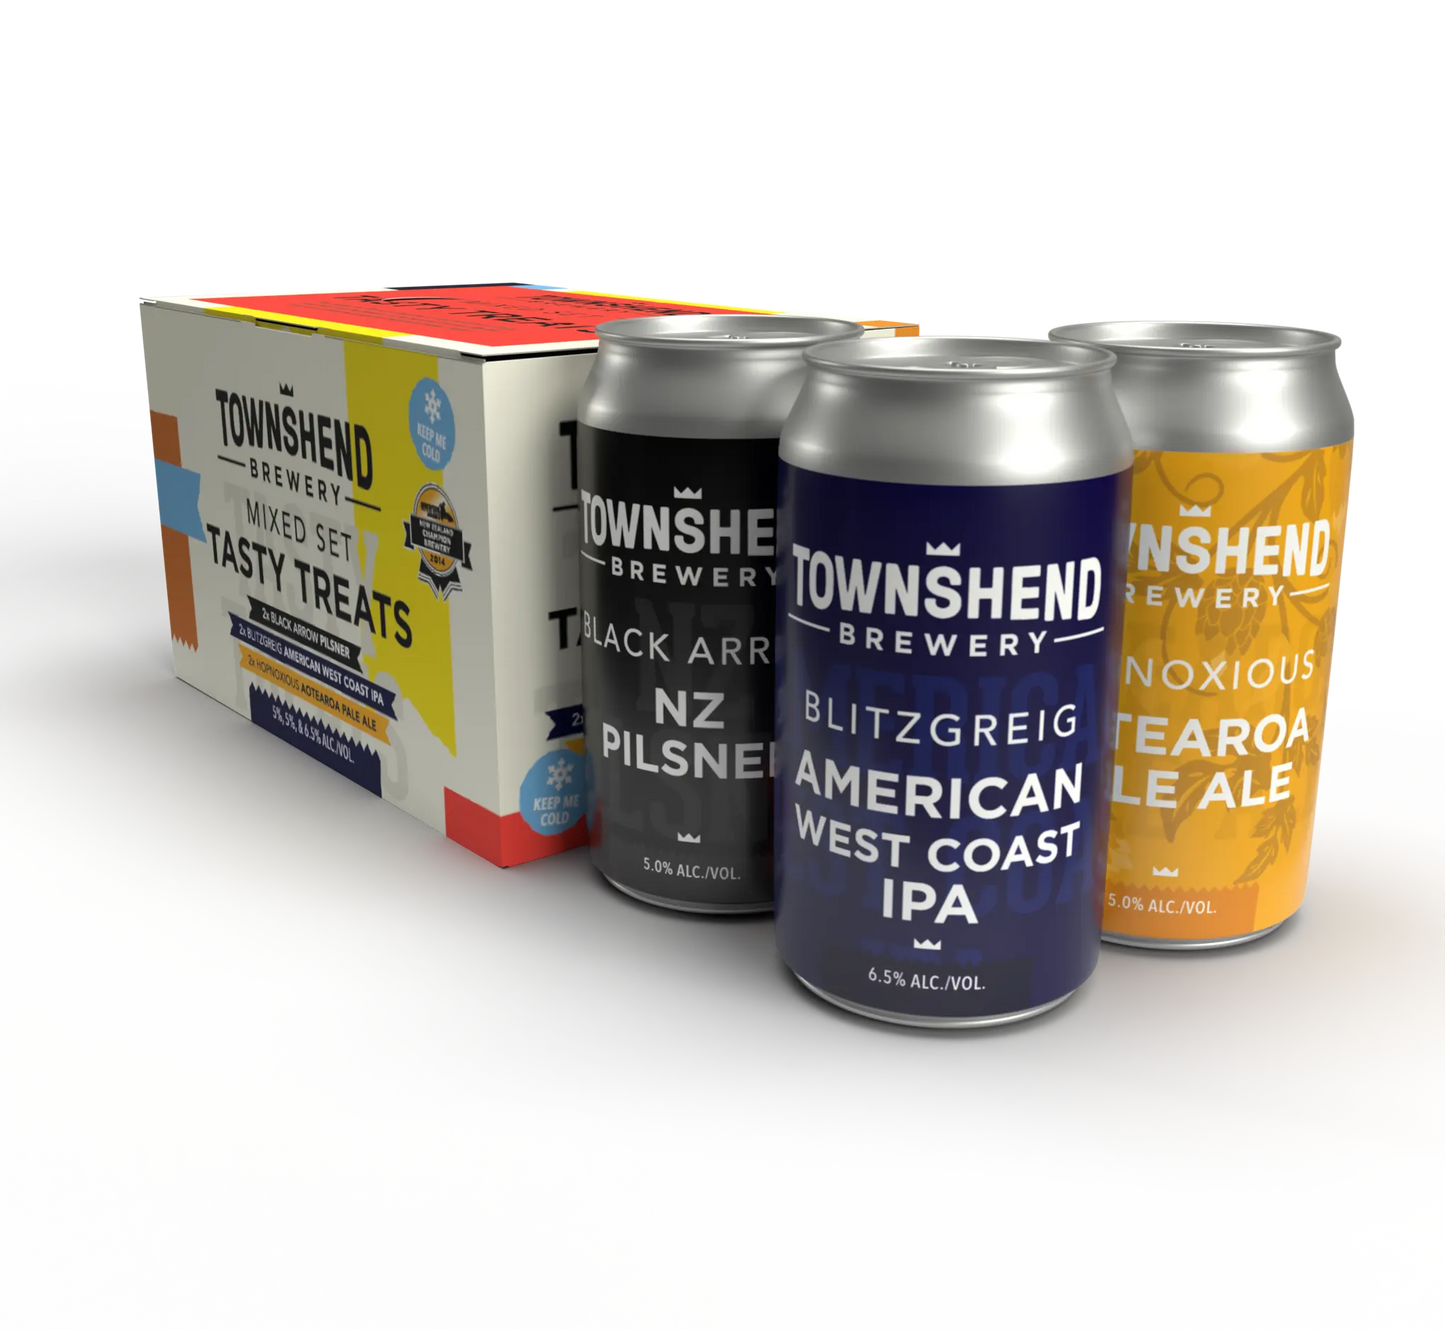 Townshend Mixed Set Tasty Treats 6 Pack Cans